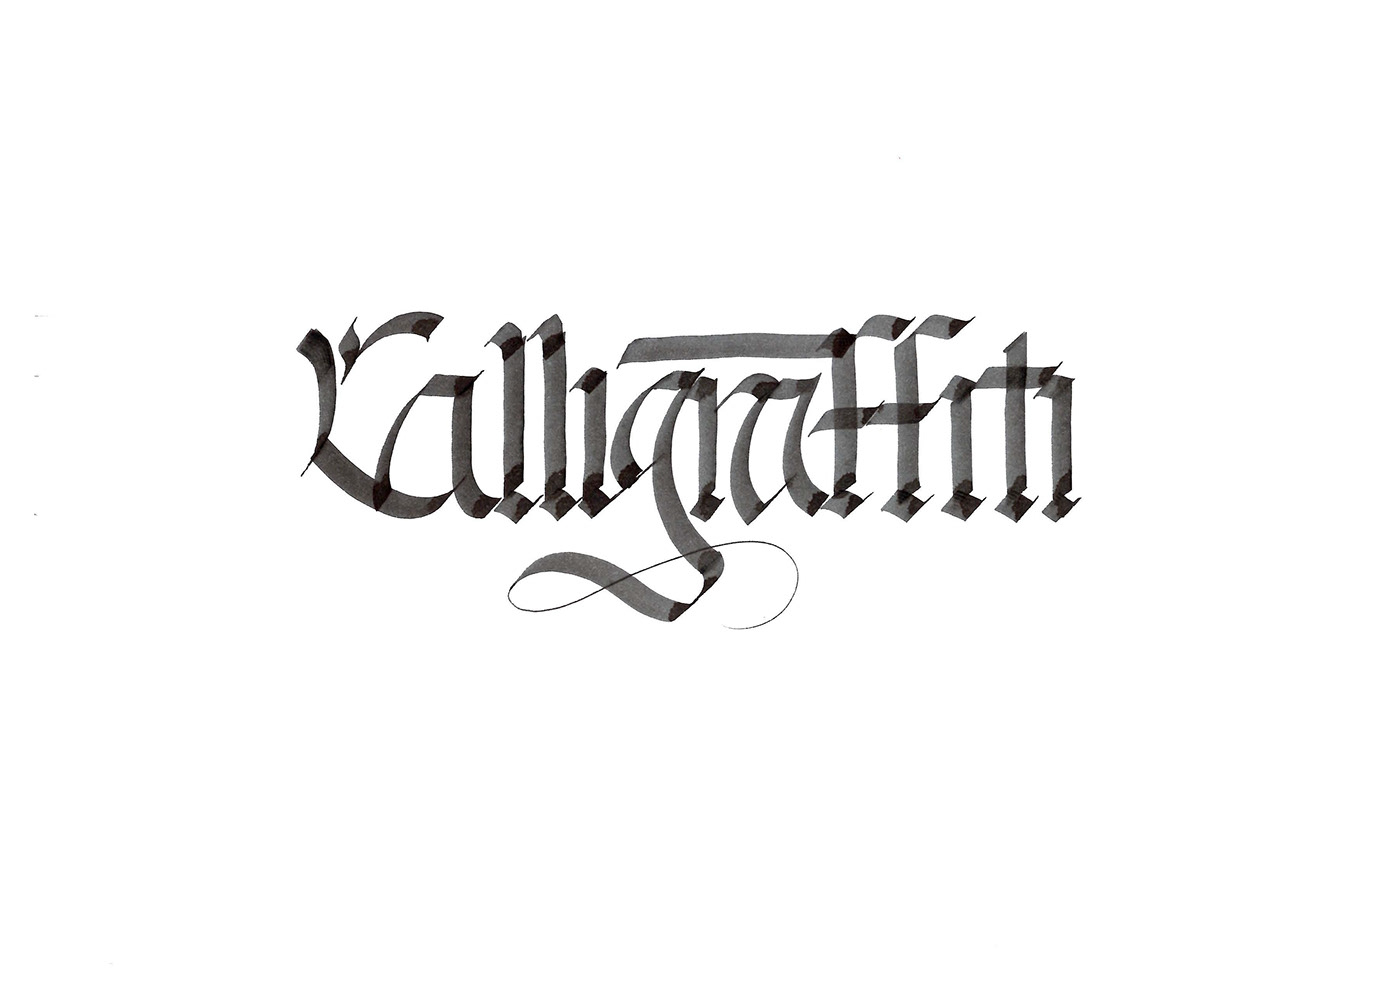 Calligraphy   Handlettering videomapping